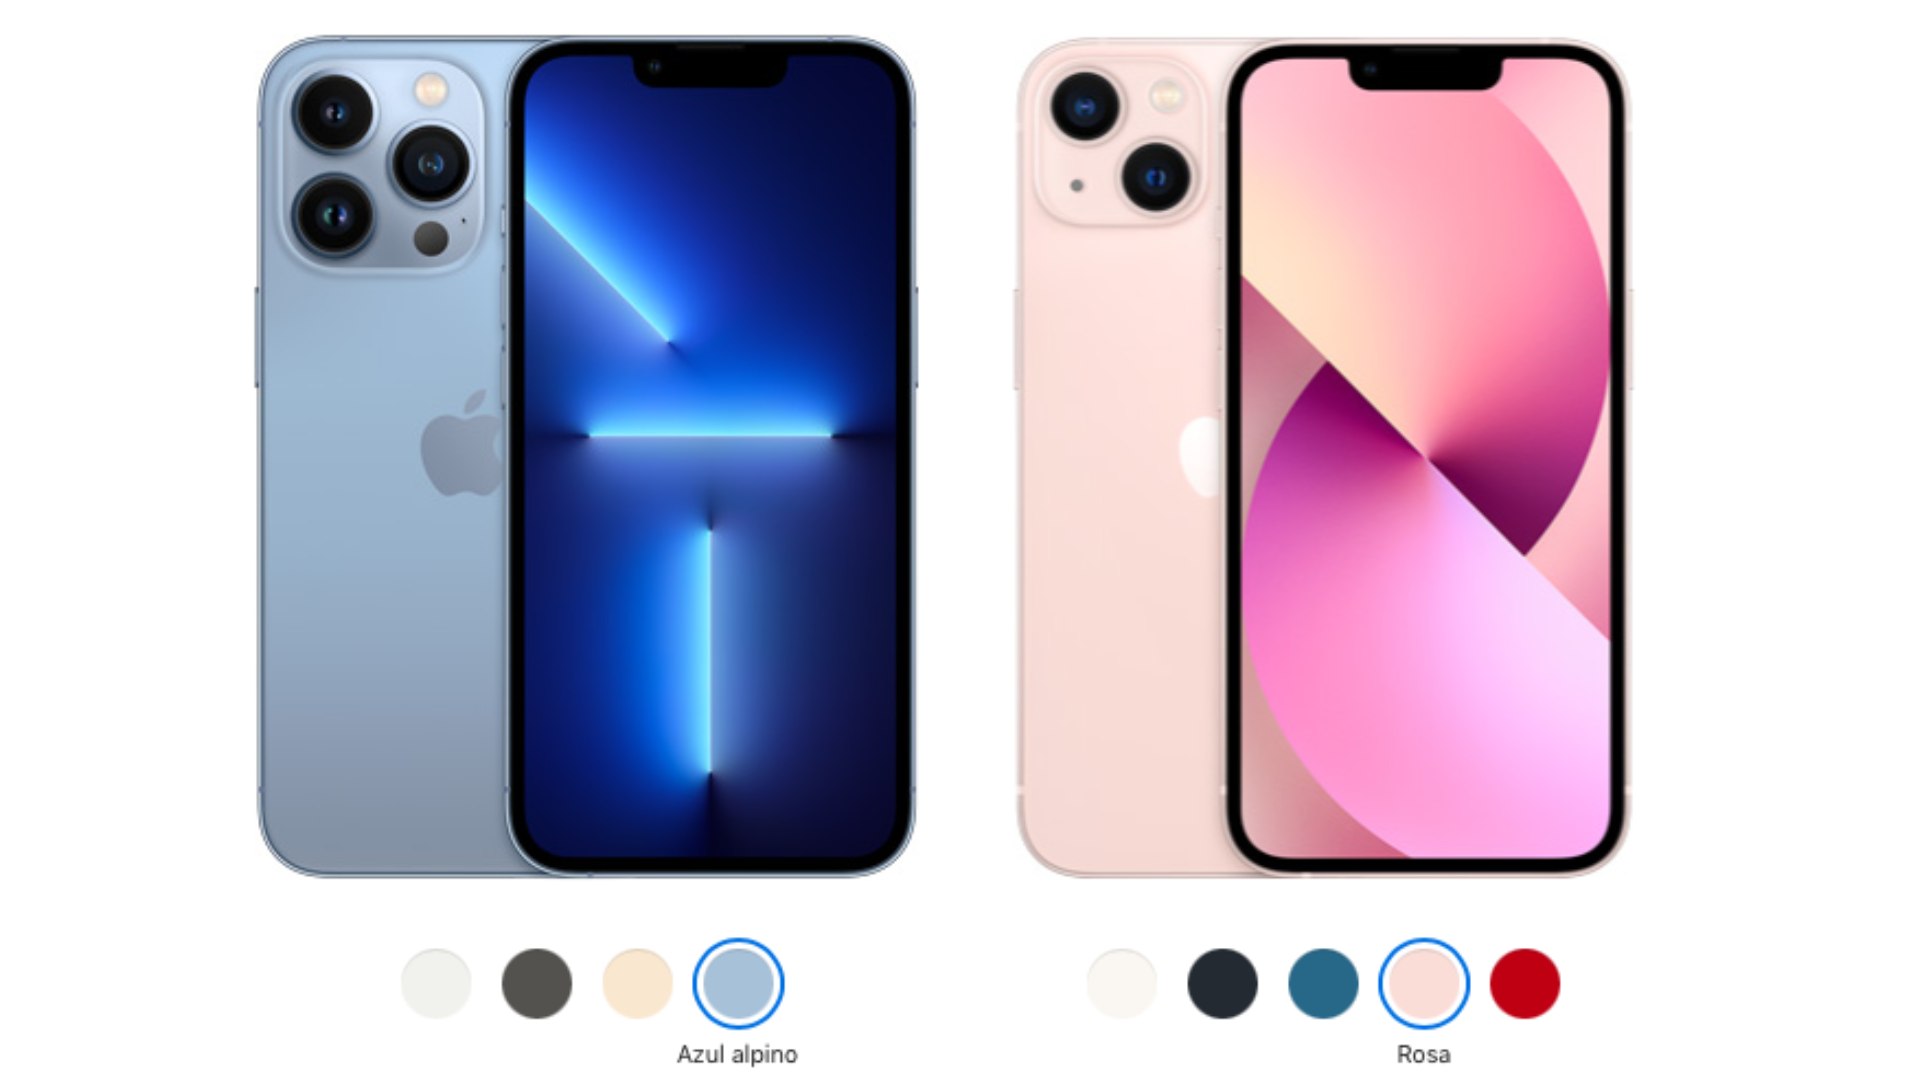 IPhone 13 vs iPhone 13 Pro: What are the differences in specs?